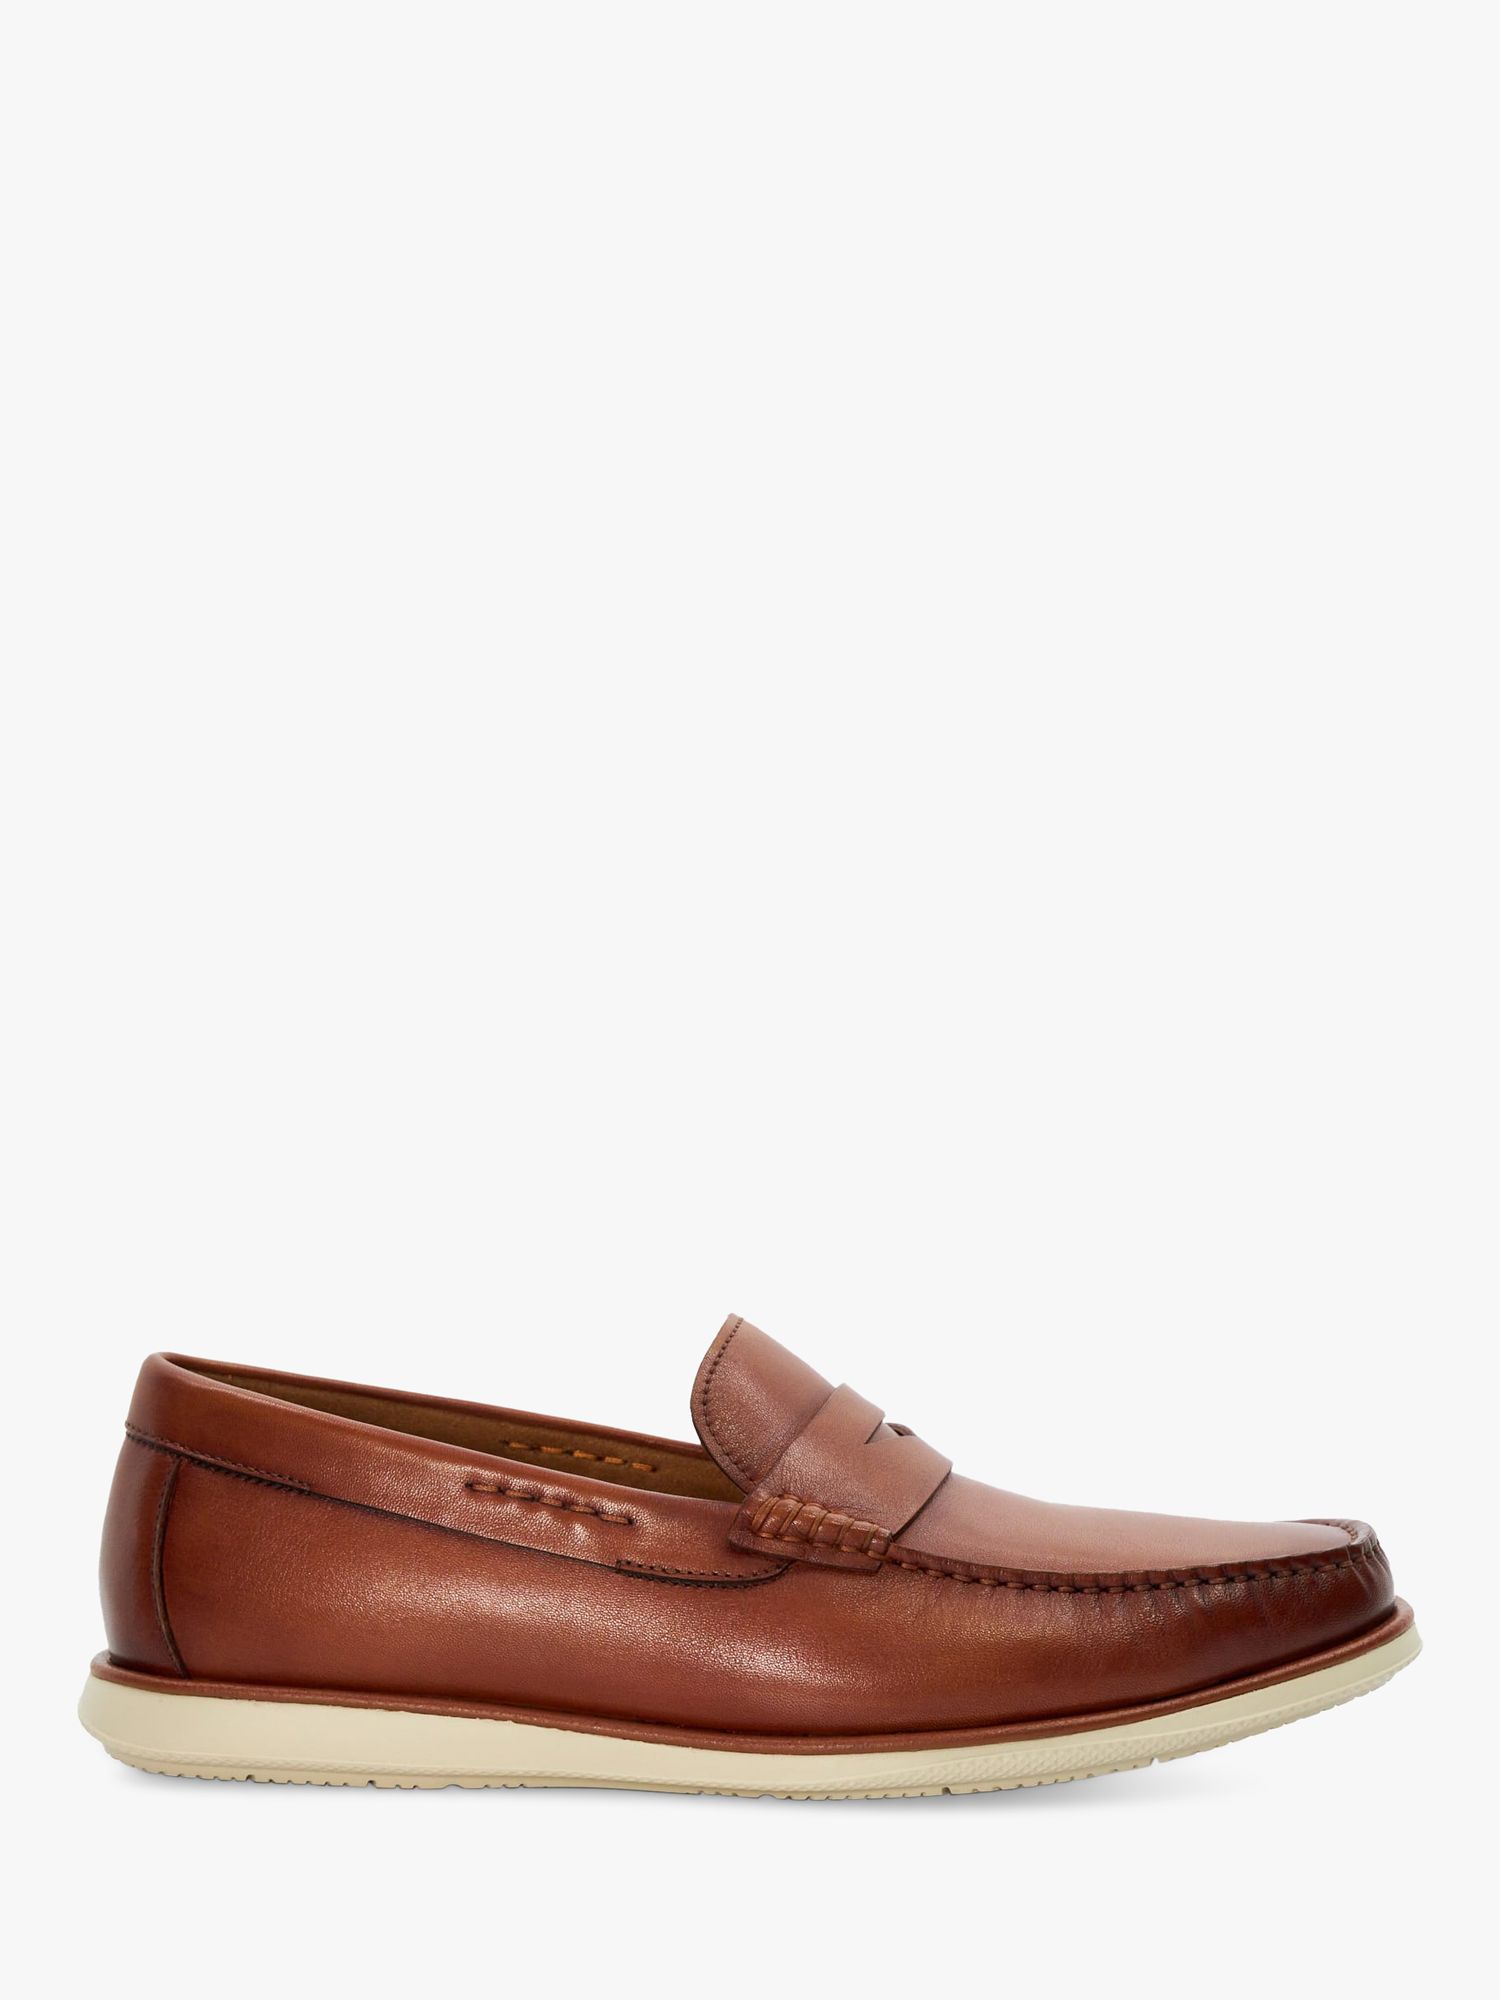 Dune Berkly Leather Loafers, Brown at John Lewis & Partners